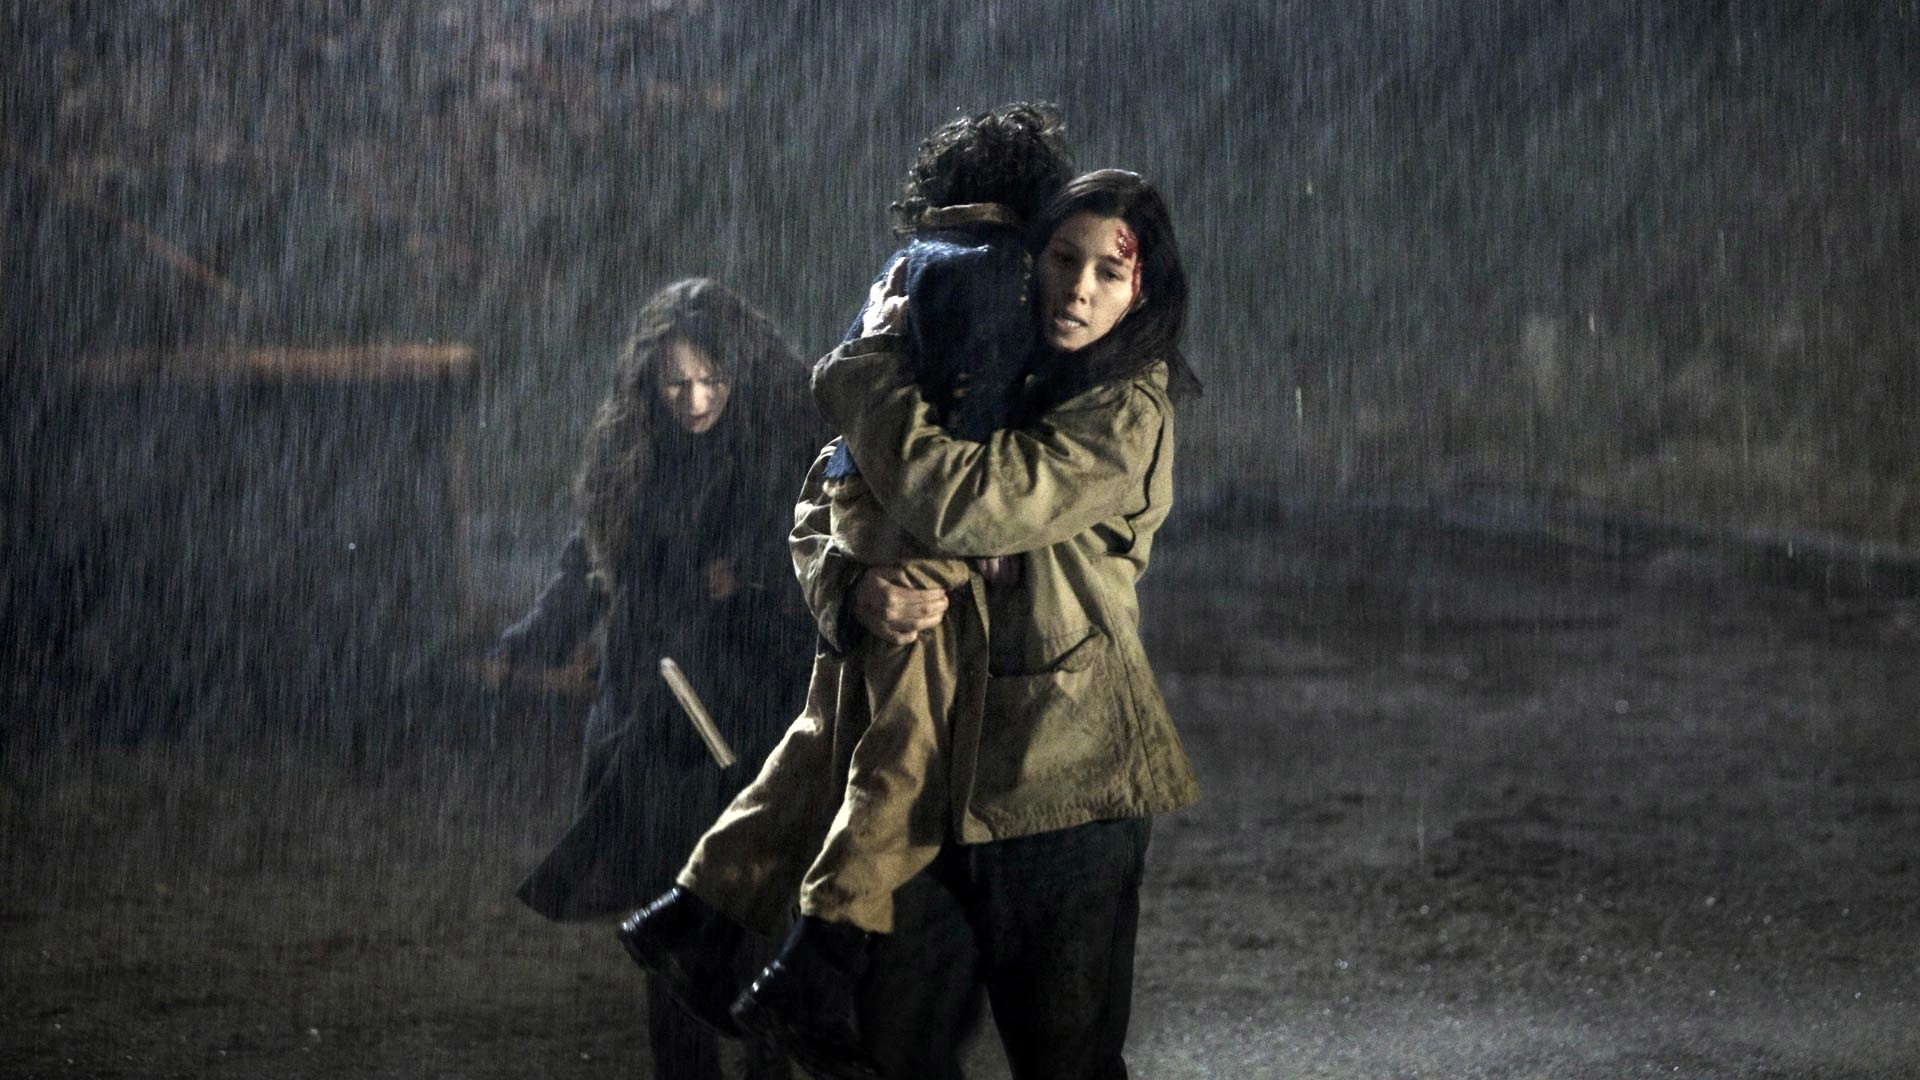 Jodelle Ferland stars as Jenny and Jessica Biel stars as Julia Denning in Image Entertainment's The Tall Man (2012)